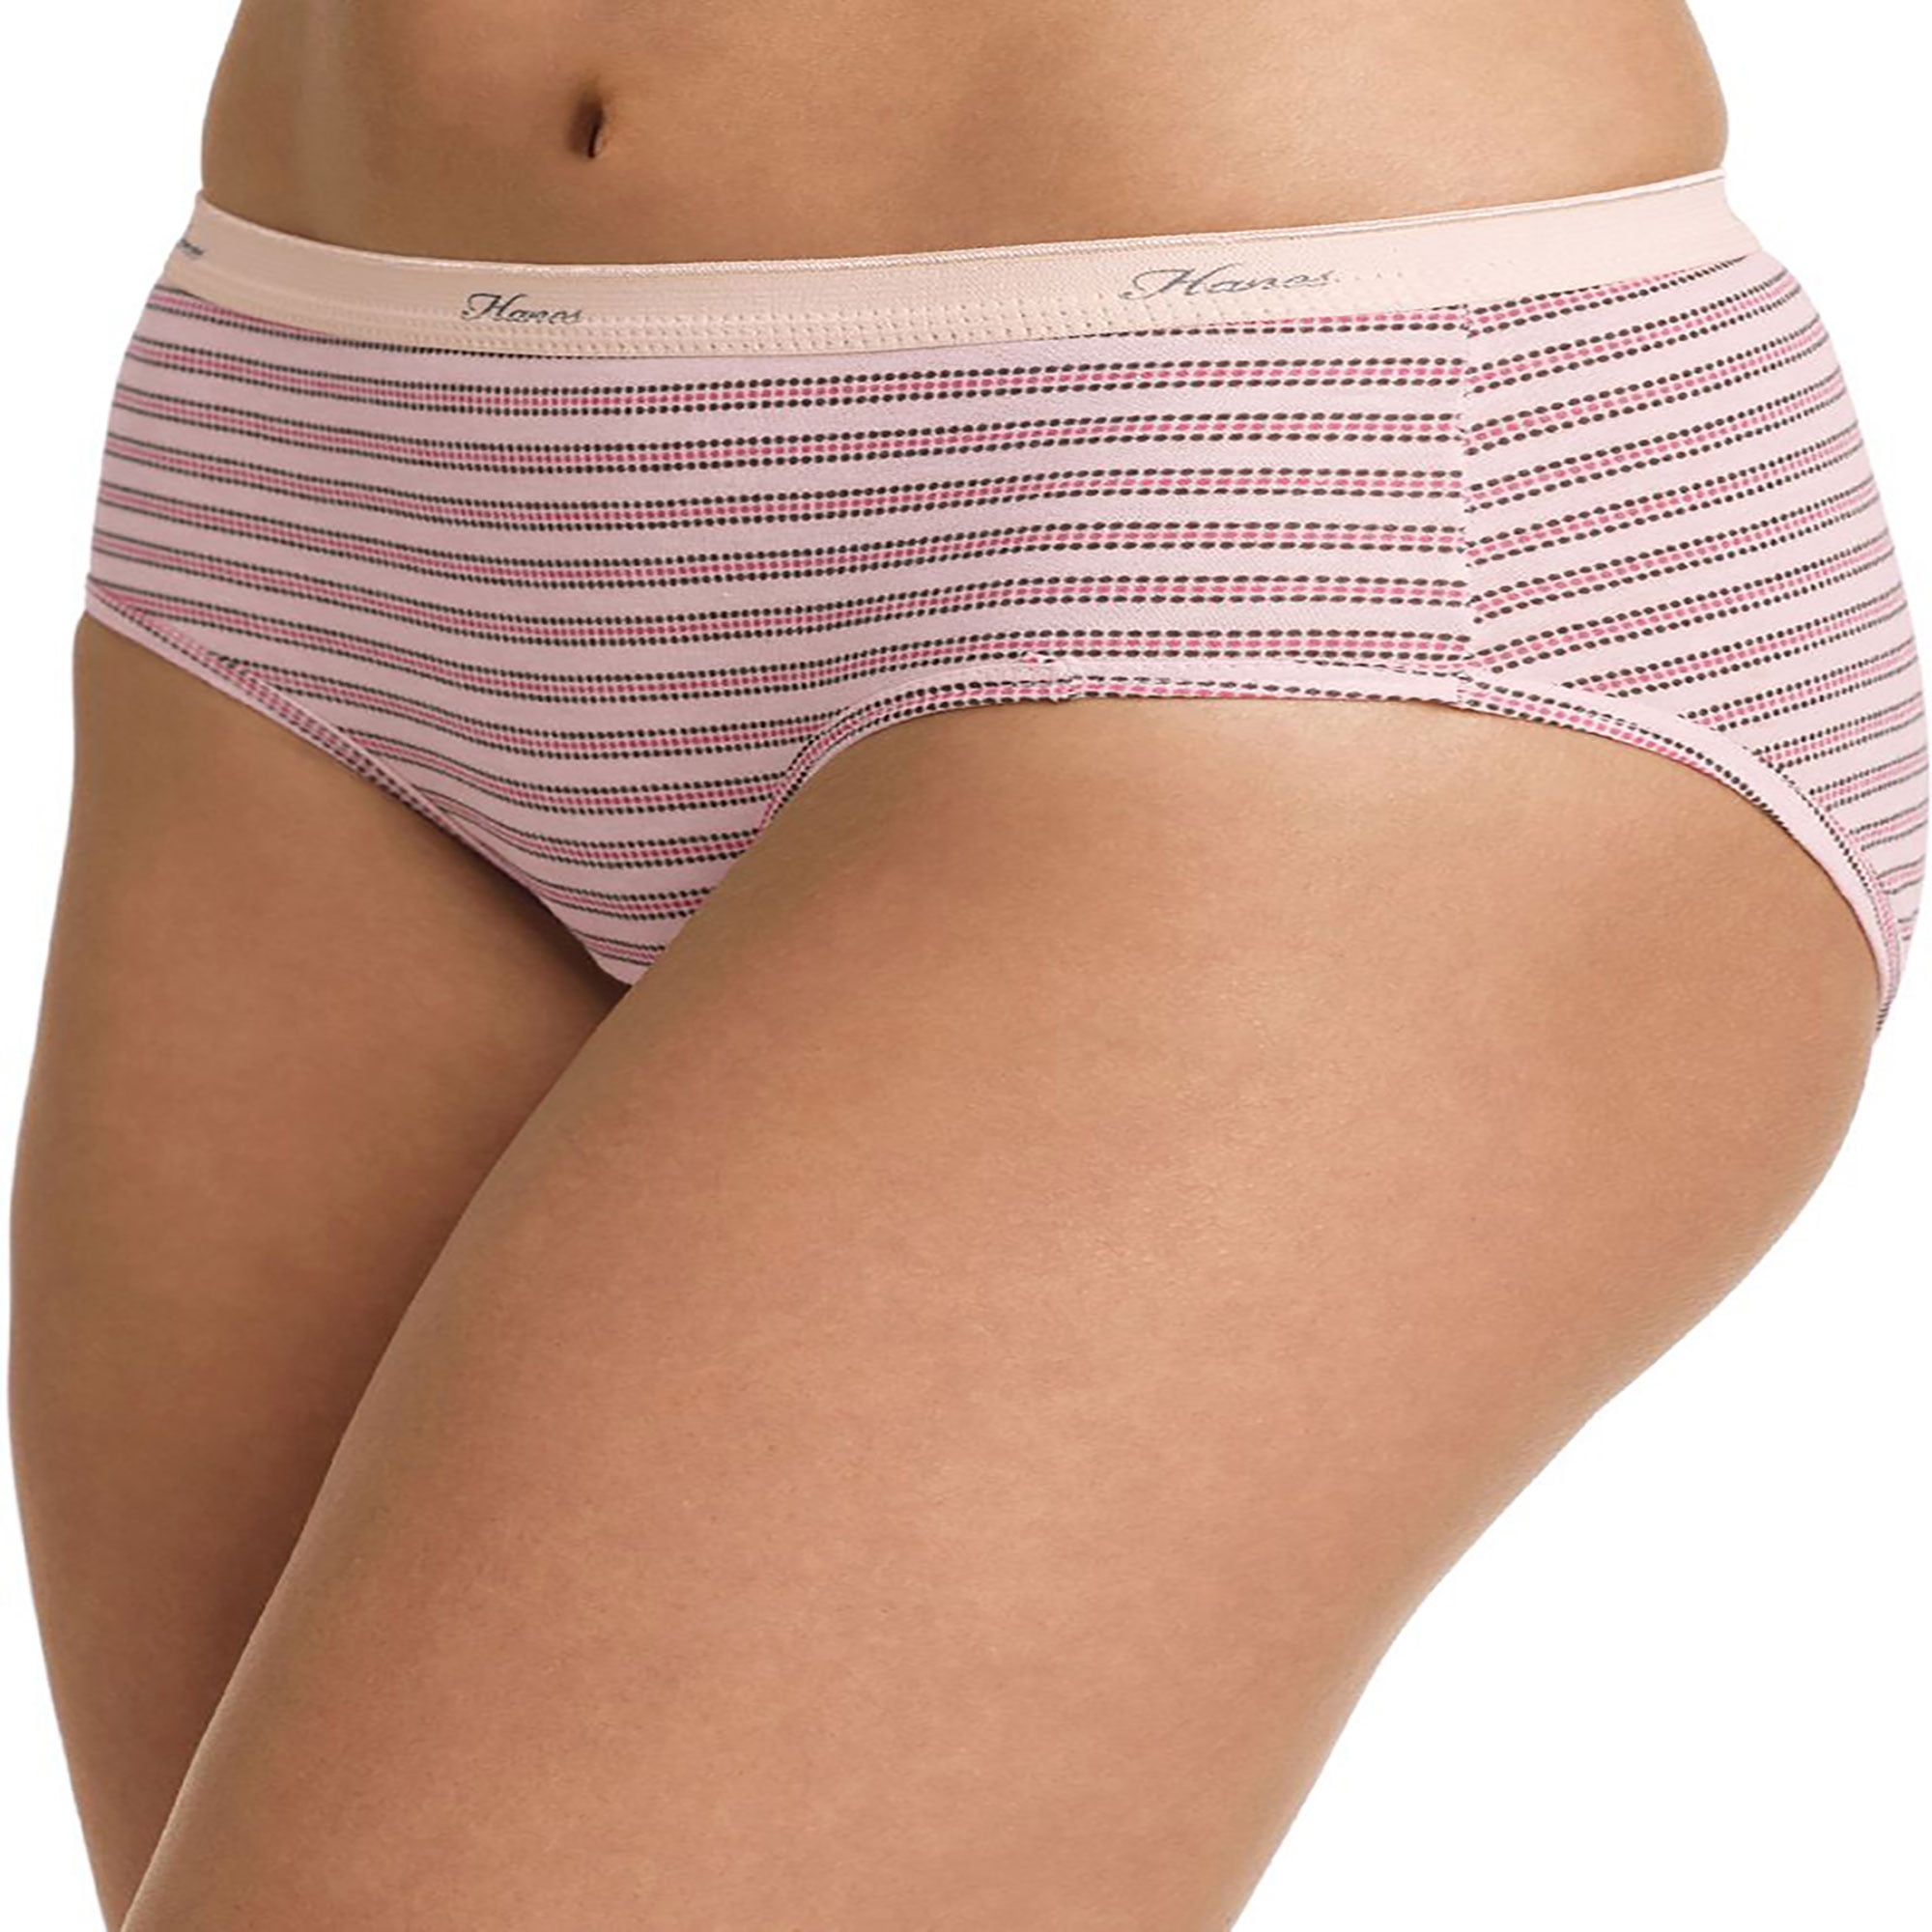 Hanes Women's No Ride Up Low Rise Cotton Brief 6-Pack, Style PP38AS